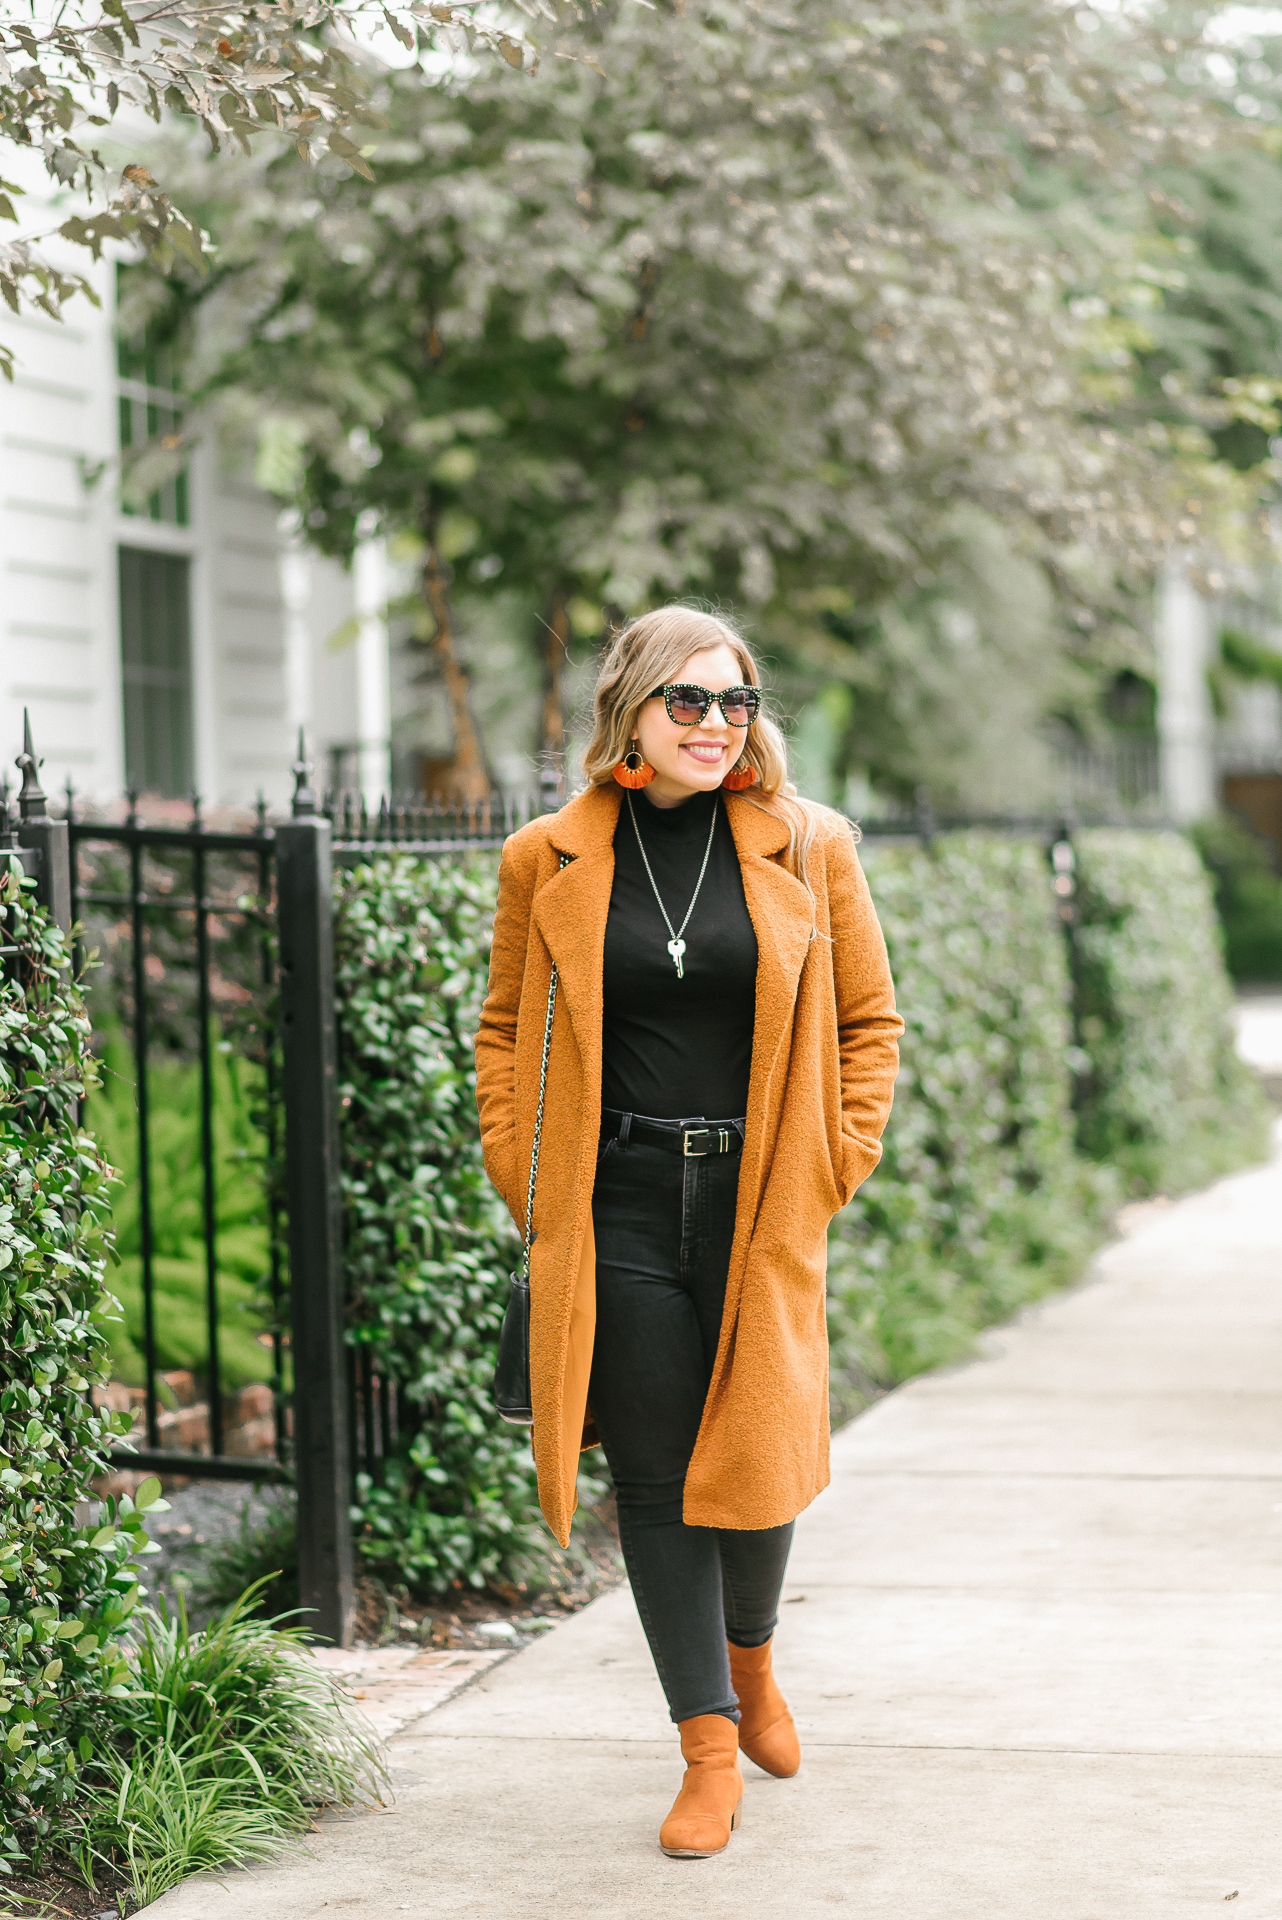 How to Style Brown Teddy Coat and Black Jeans - Fall Fashion on Cup of Charisma